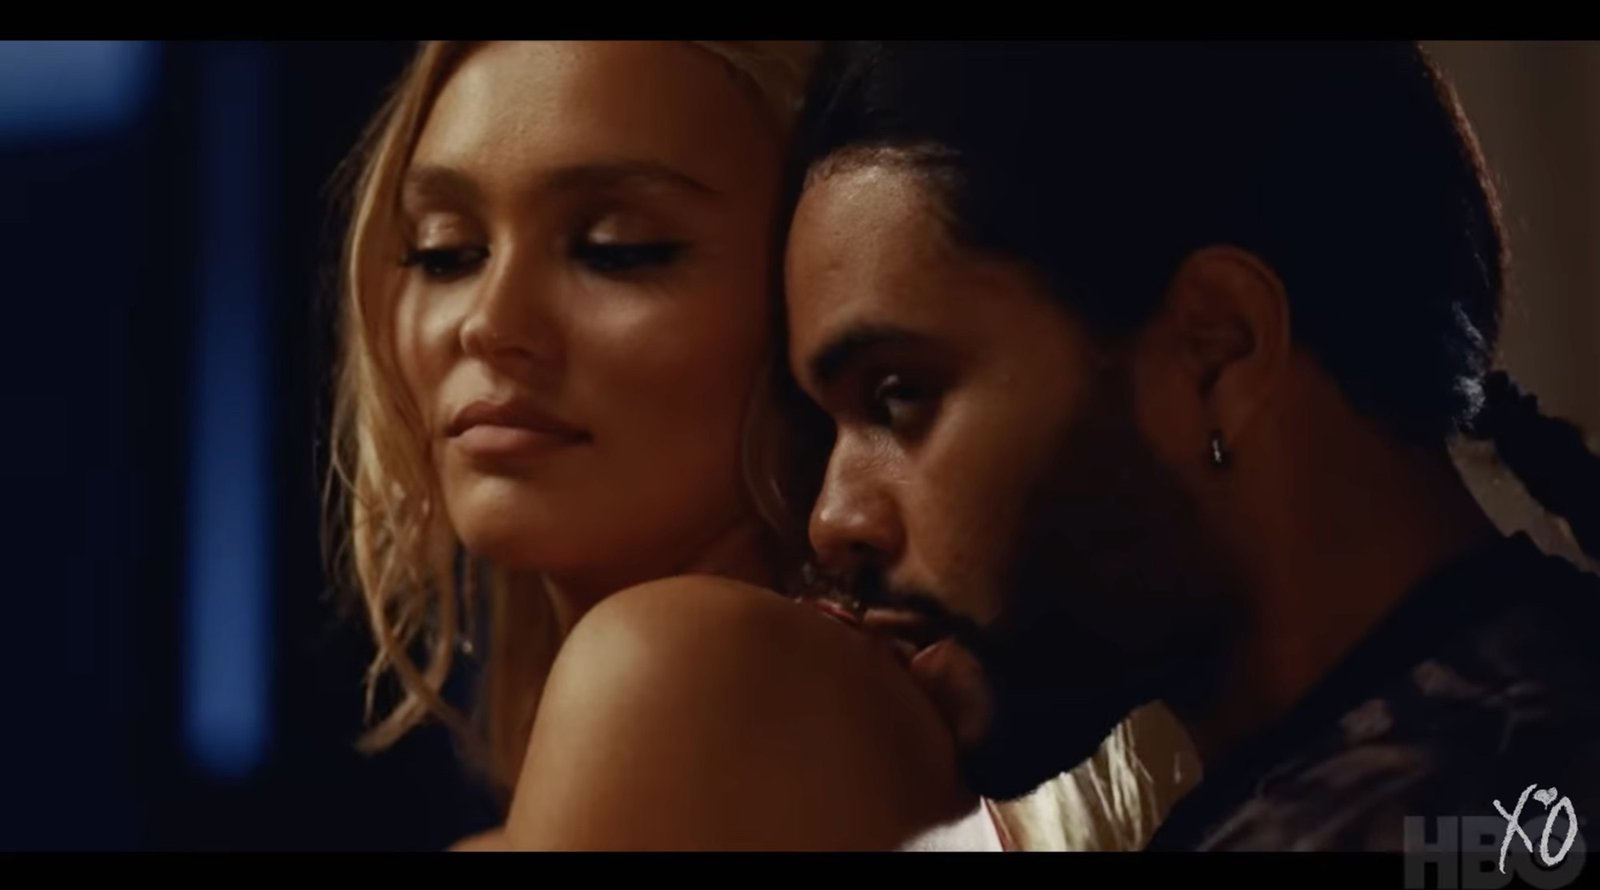 The Weeknd with face against Lily Rose Depps shoulder in "The Idol"